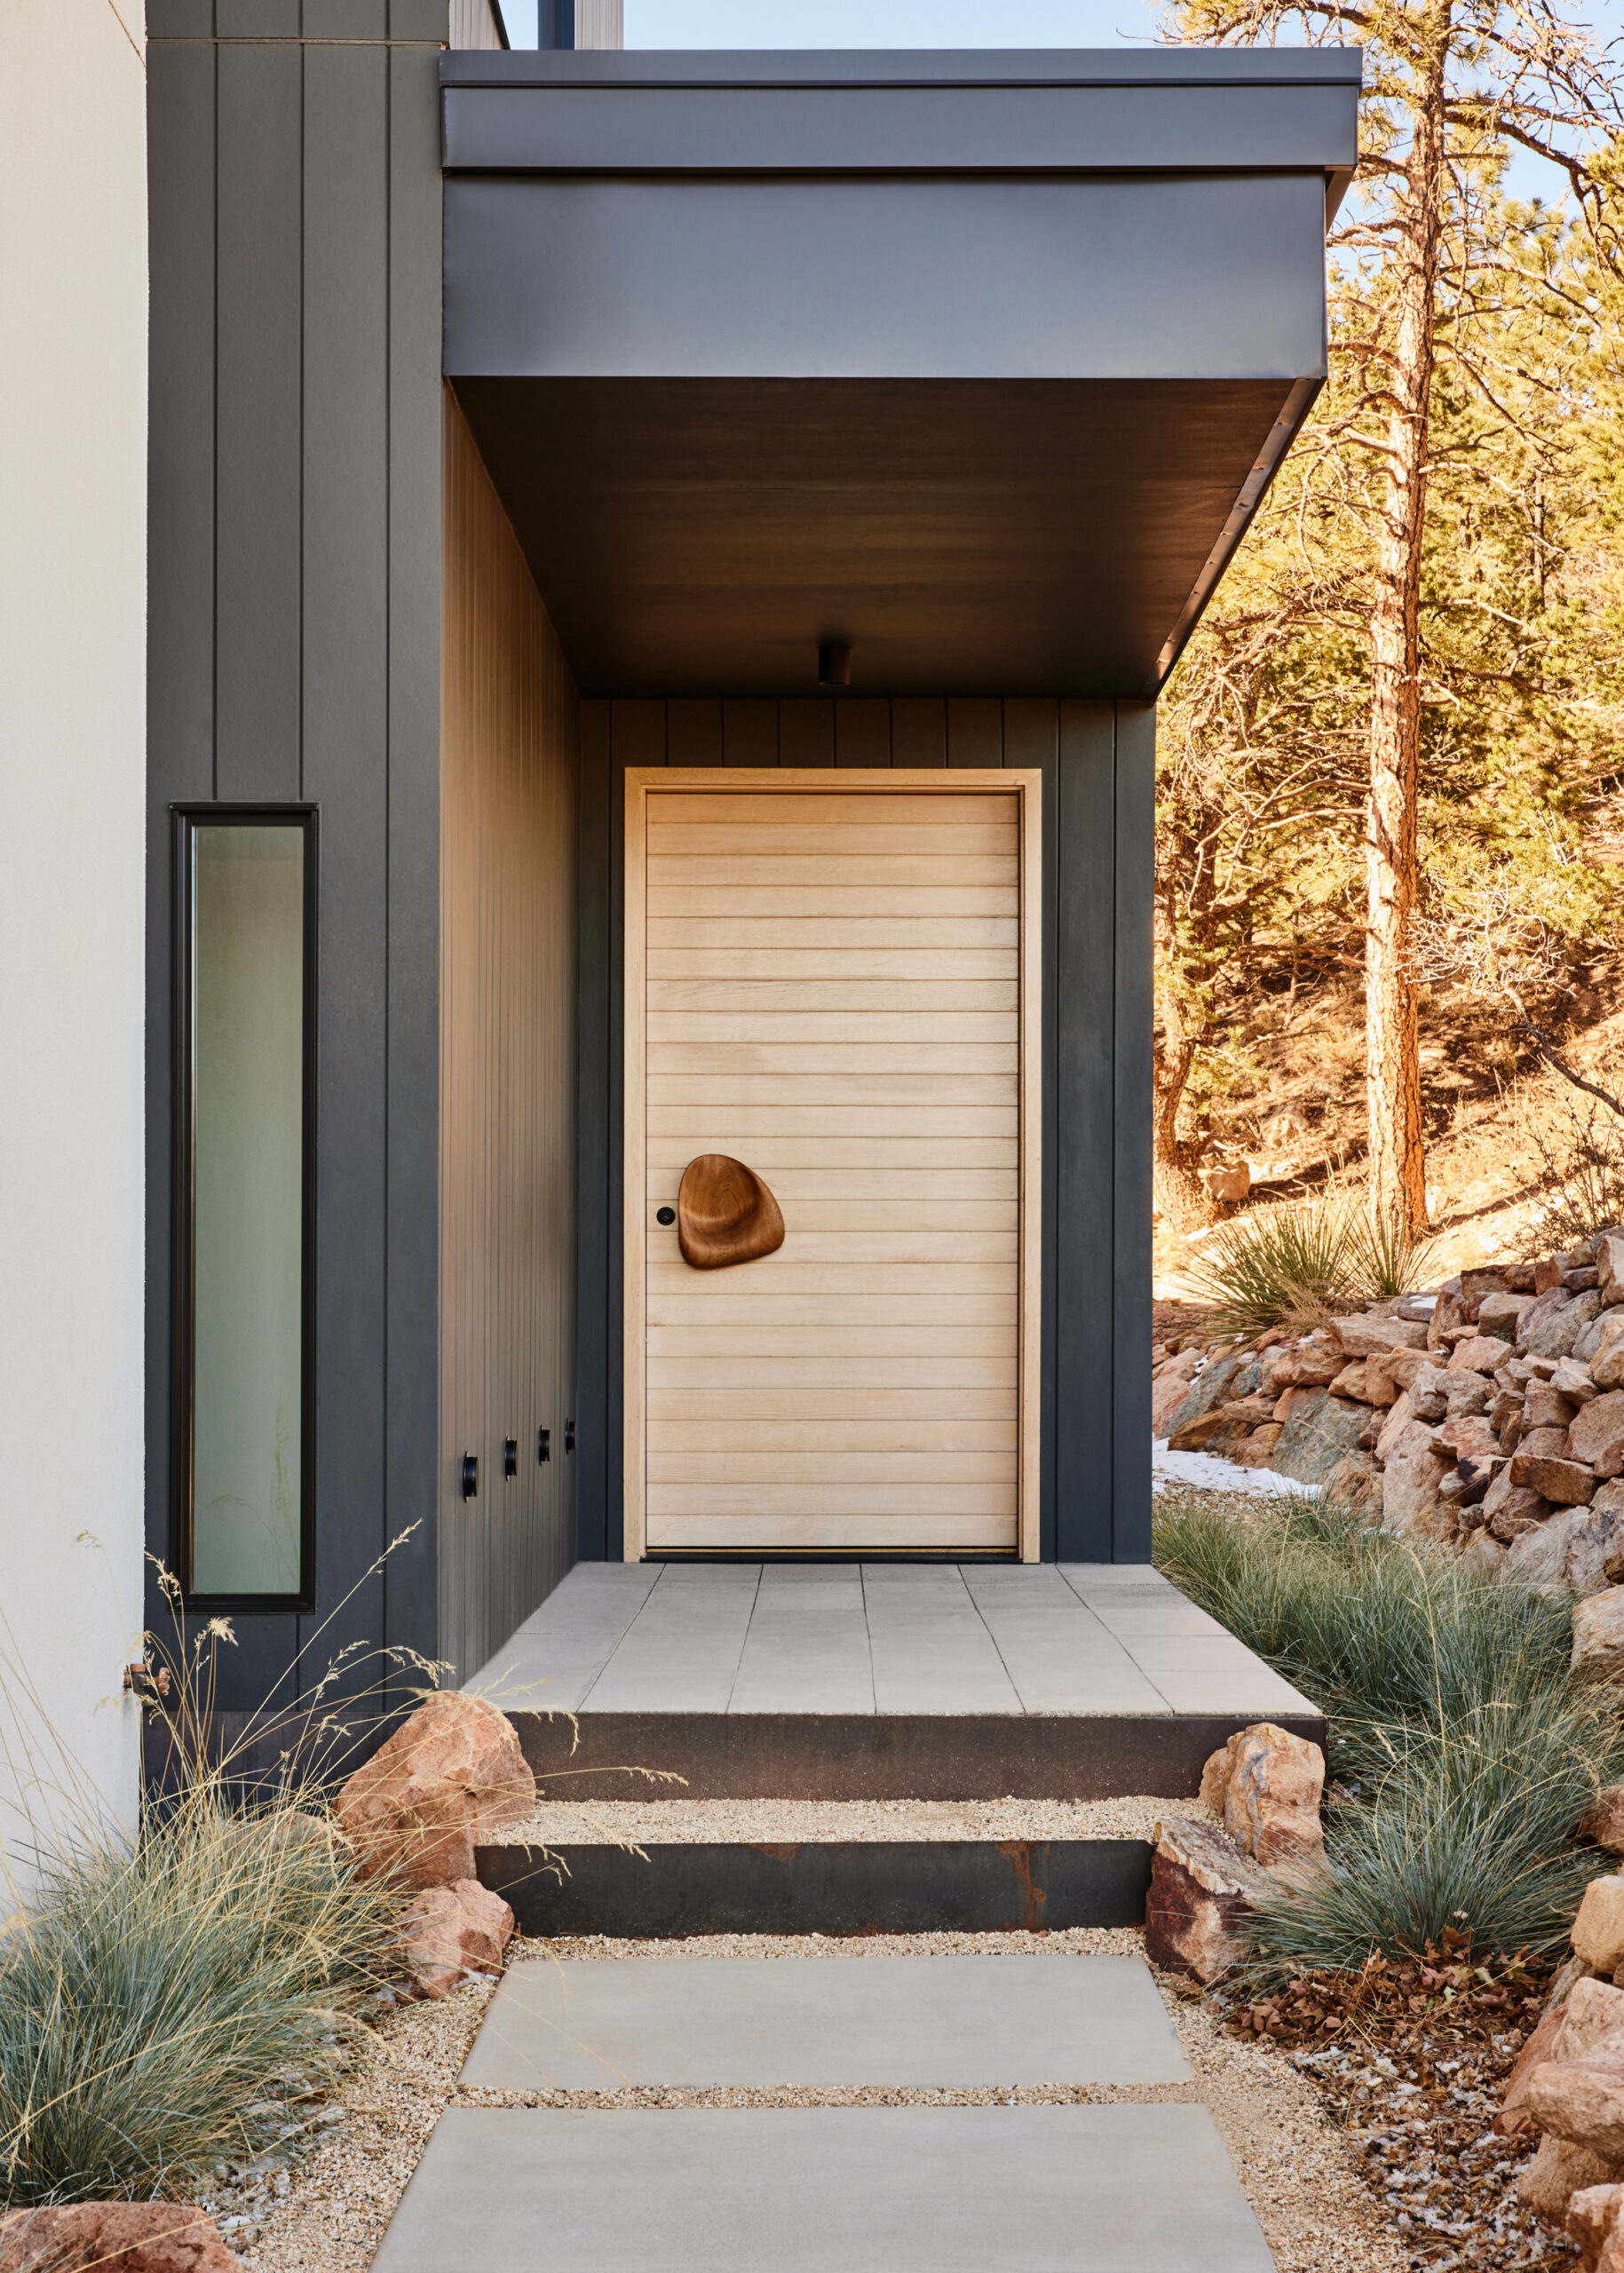 The home has exceptional design details like this organically shaped wood doorknob. (Nicole Franzen)